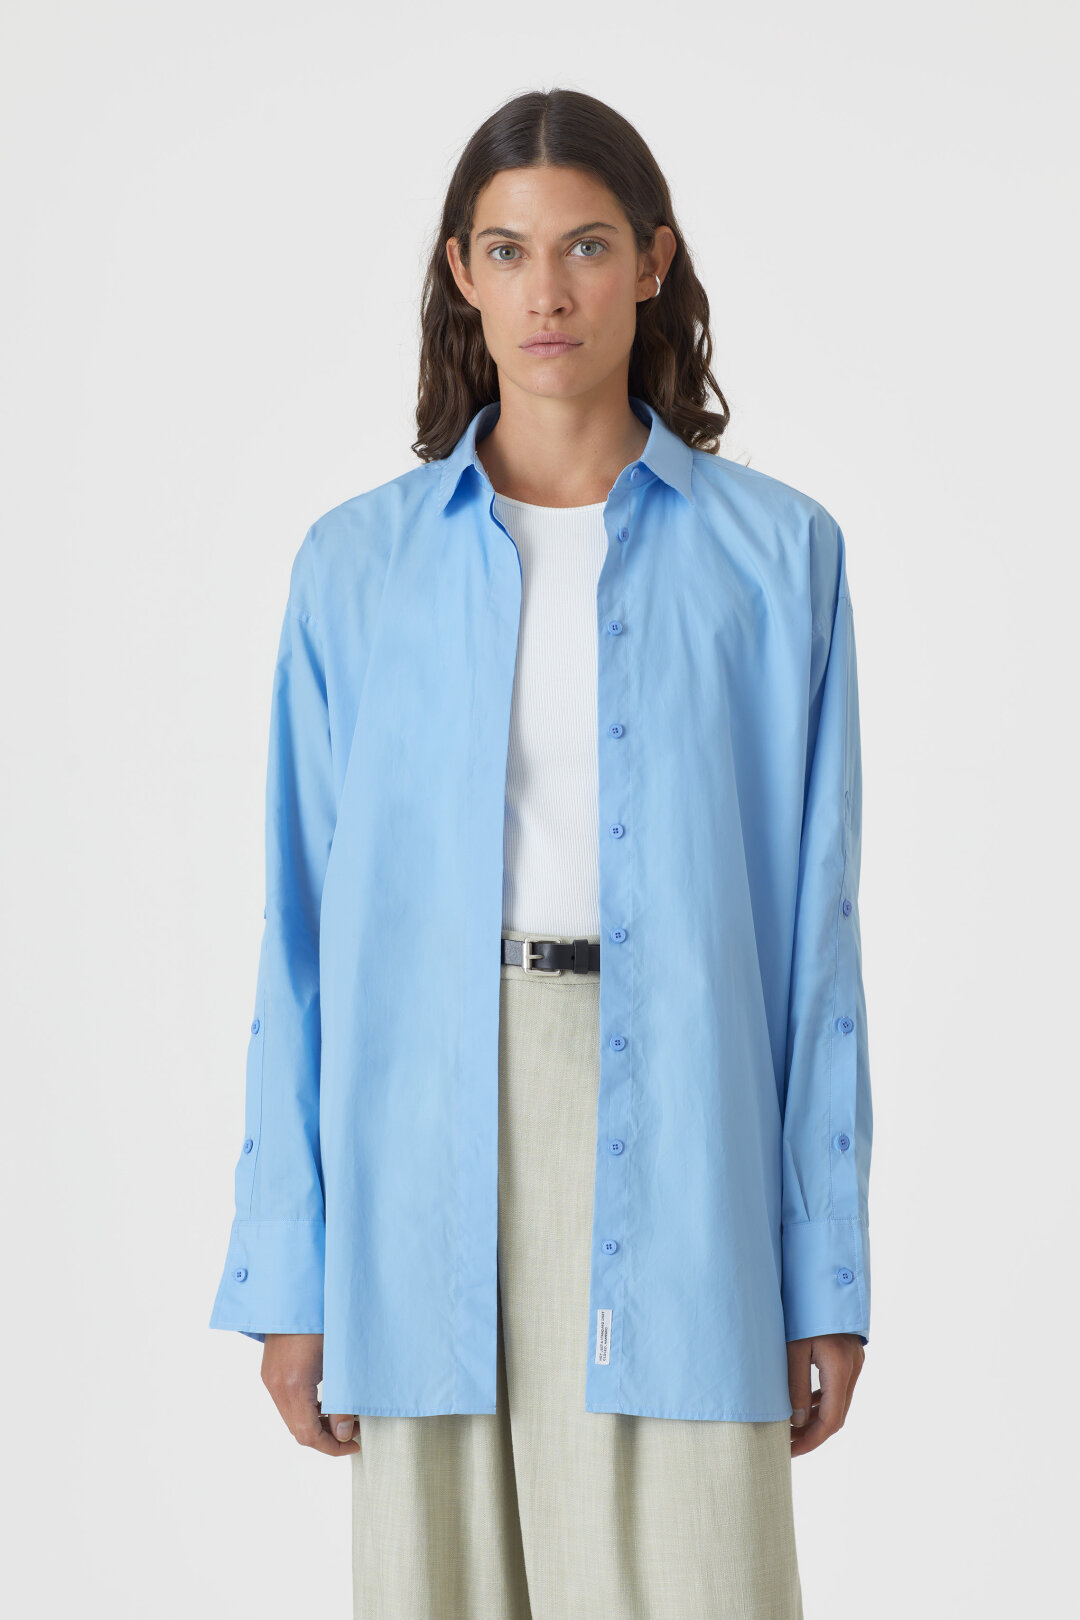 CLOSED Placket Detail Shirt in Blue Morning Sky